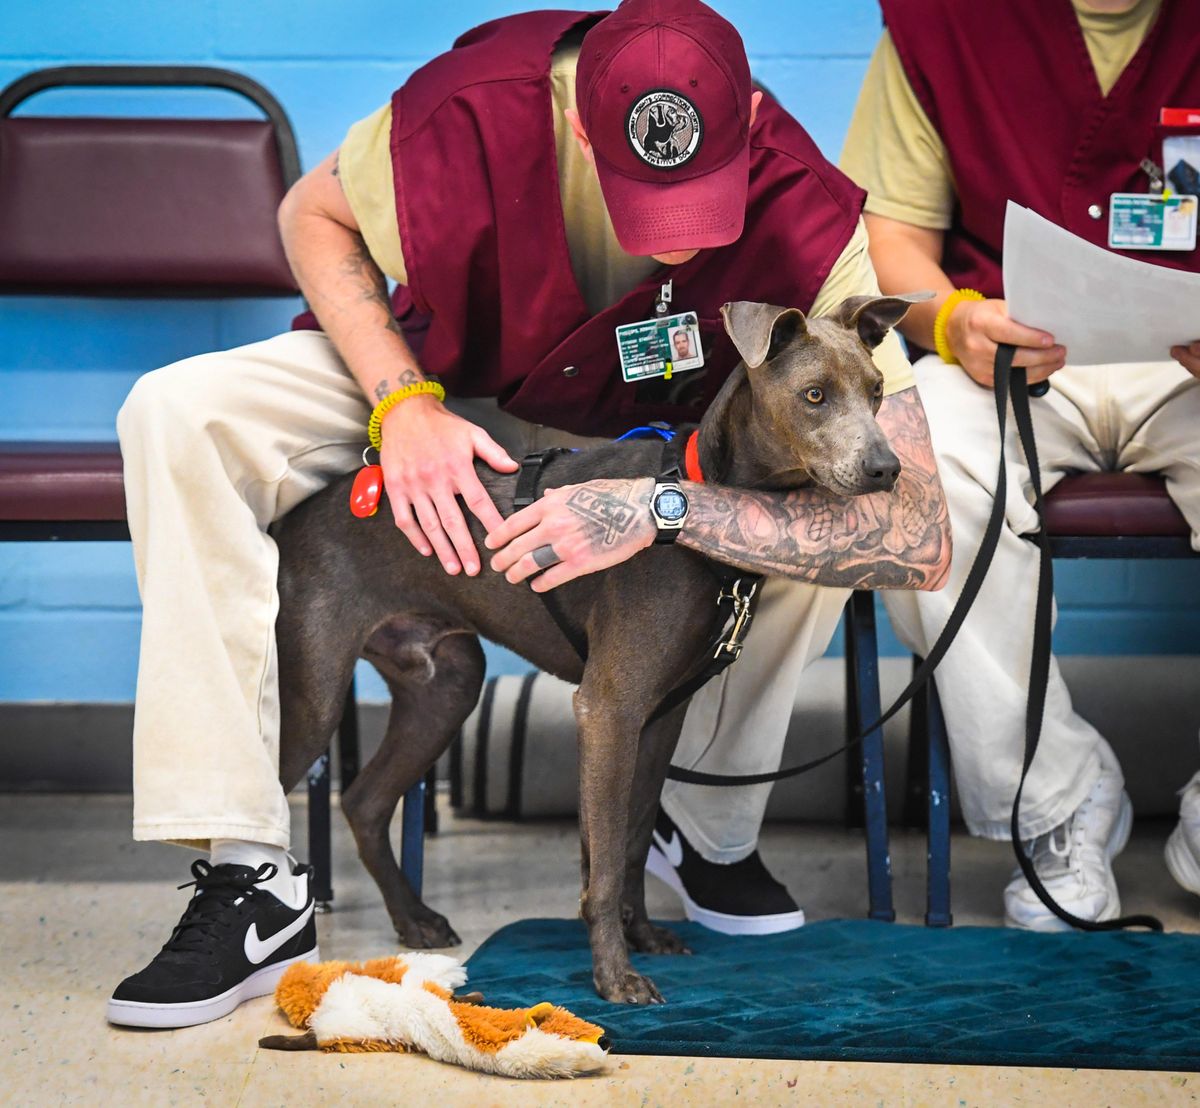 Airway Heights Corrections Center inmate dog handler Josh Phillips embraces his dog Lincoln during a Pawsitive Dog program training session, Wednesday, Aug. 1, 2018. The one-year-old Weimaraner mix is from the Spokane Humane Society. (Dan Pelle / The Spokesman-Review)